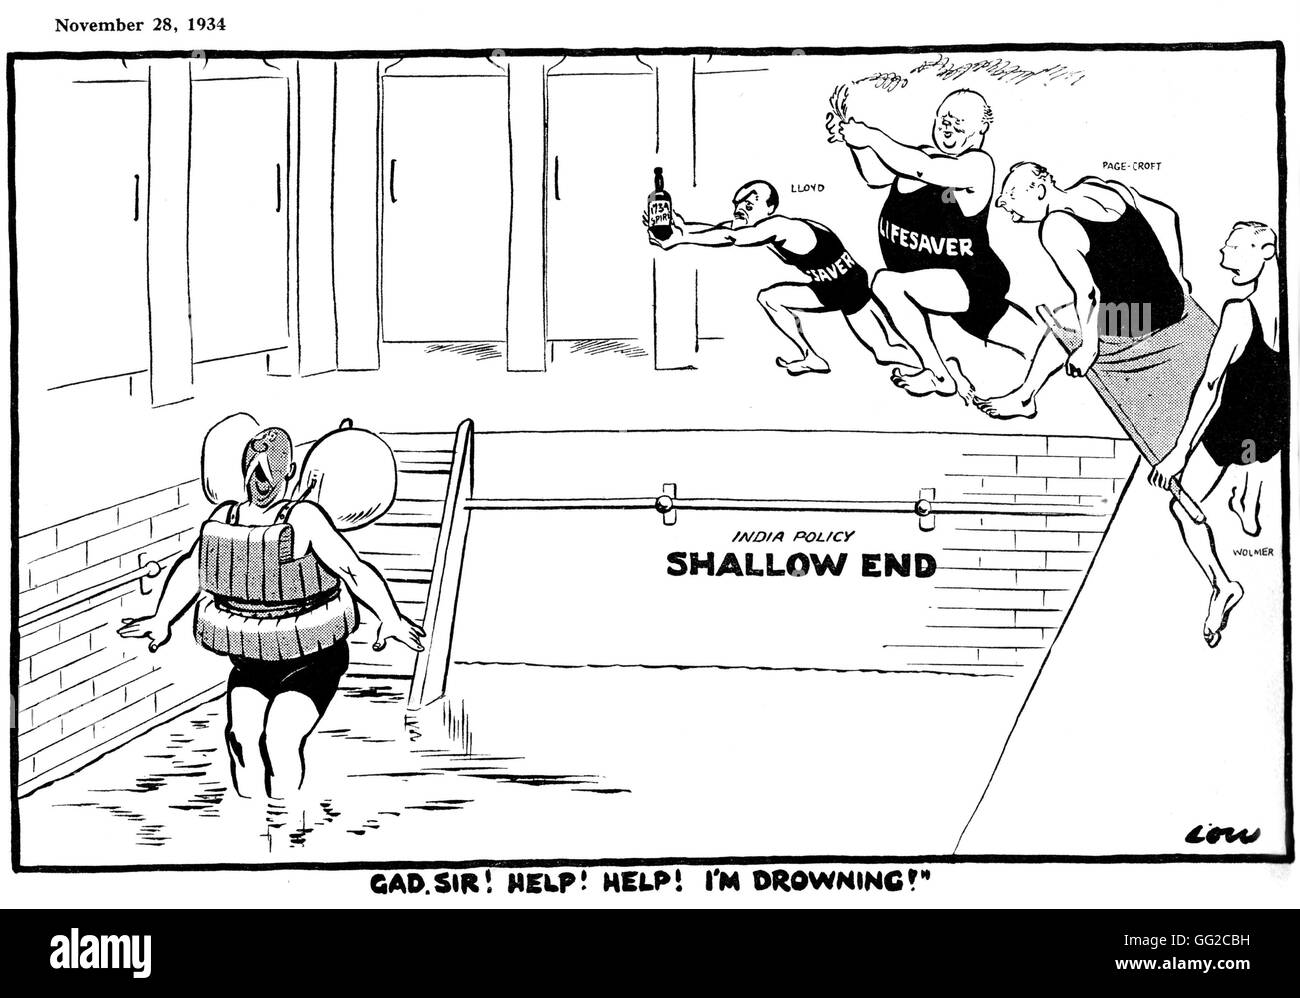 Satirical cartoon on Churchill and the colonial policy November 1934 Great Britain Stock Photo